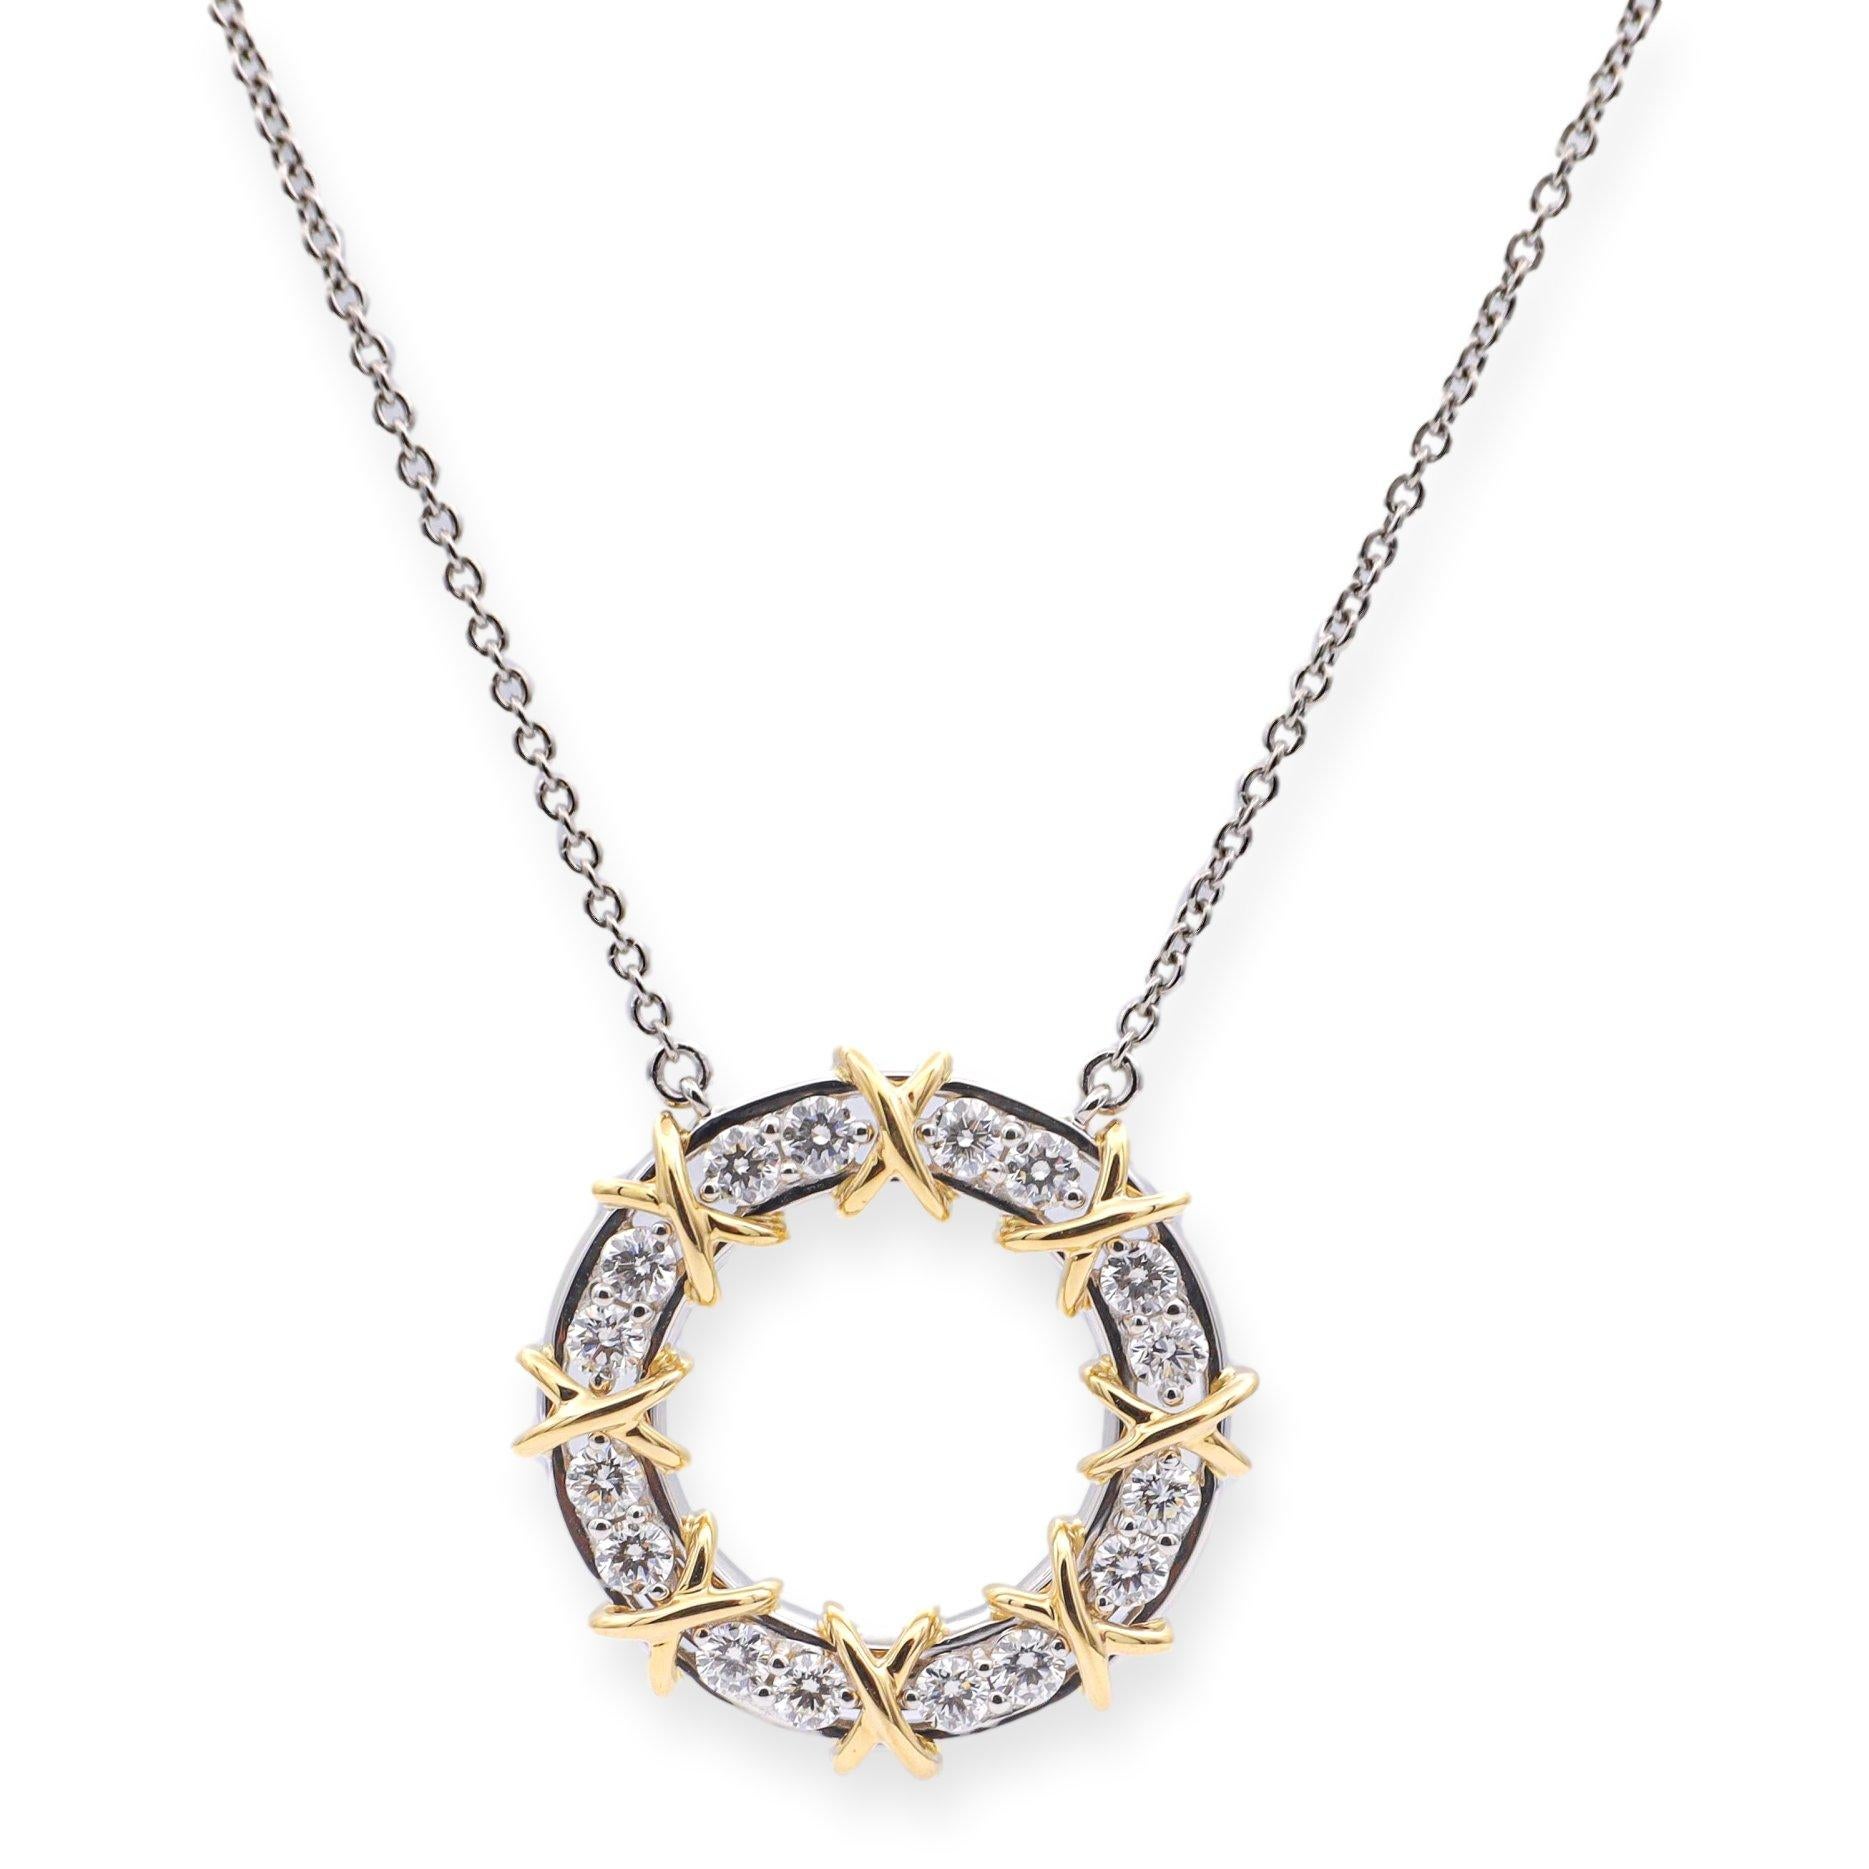 Tiffany & Co. sixteen stone pendant from the Jean Schlumberger collection finely crafted in platinum and 18 karat yellow gold featuring 16 round brilliant cut diamonds weighing 0.57 carats total weight set in shared prongs interlocking with gold X